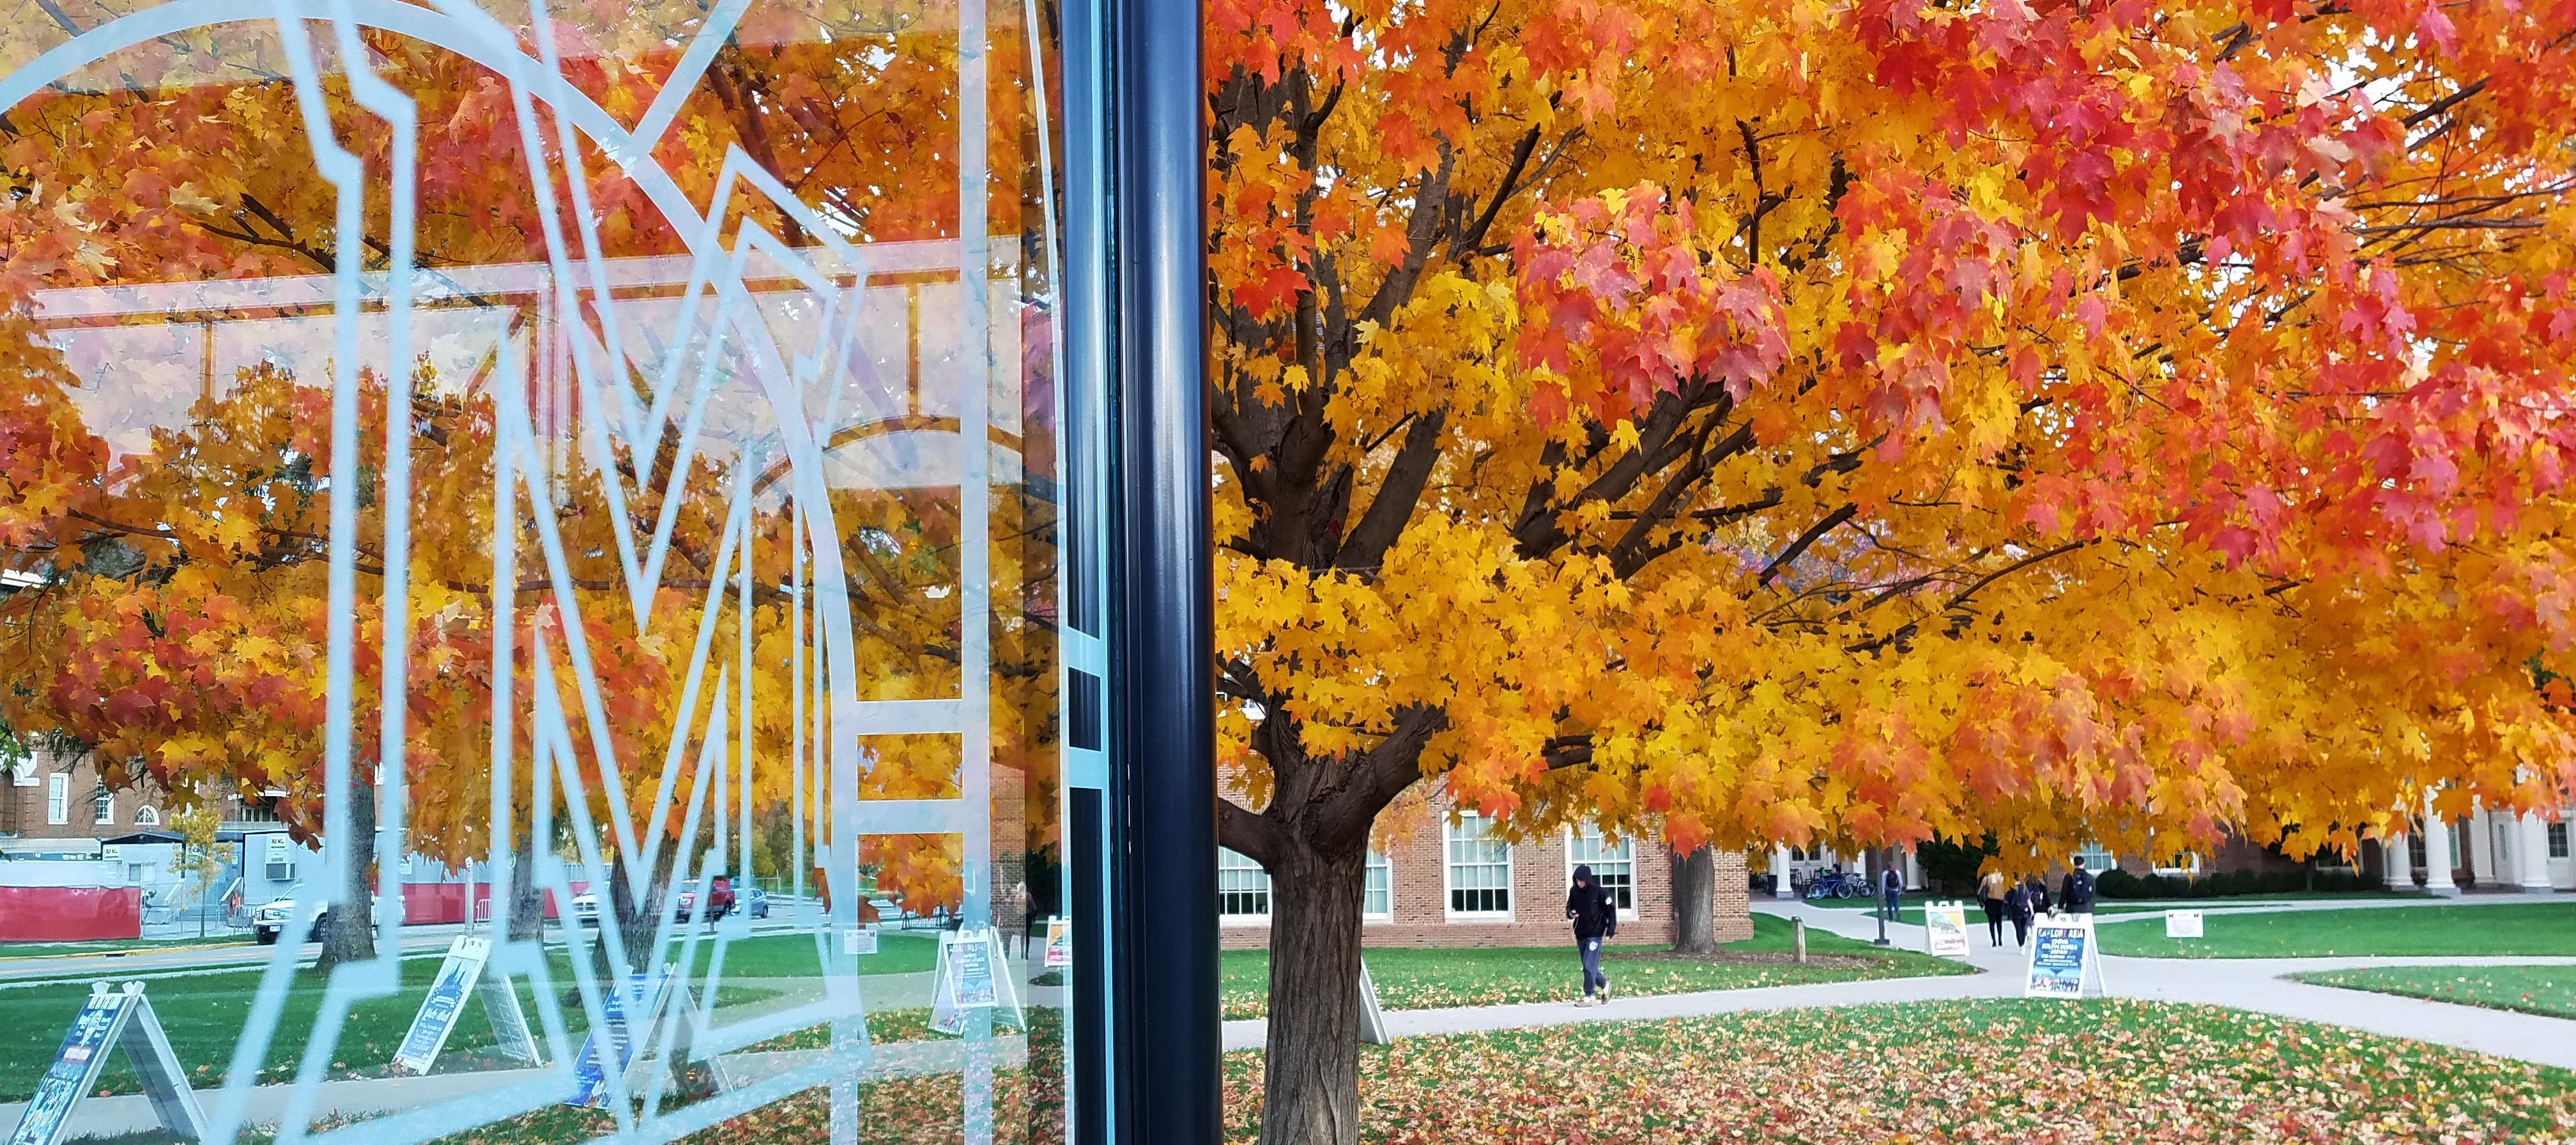  Fall view of Farmer School and trees